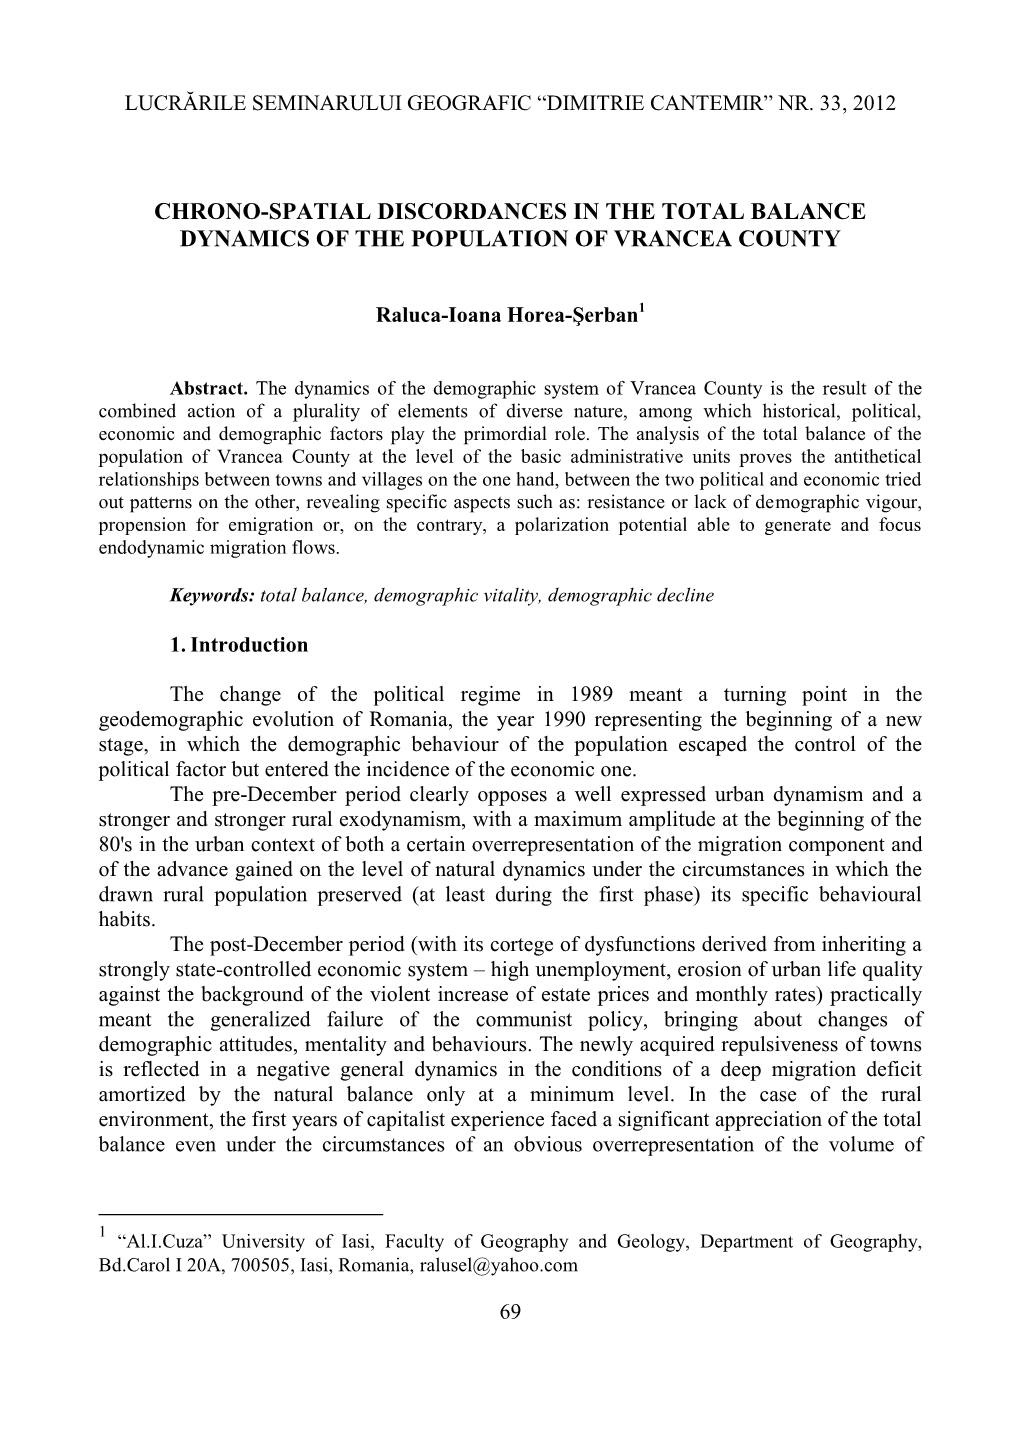 Chrono-Spatial Discordances in the Total Balance Dynamics of the Population of Vrancea County